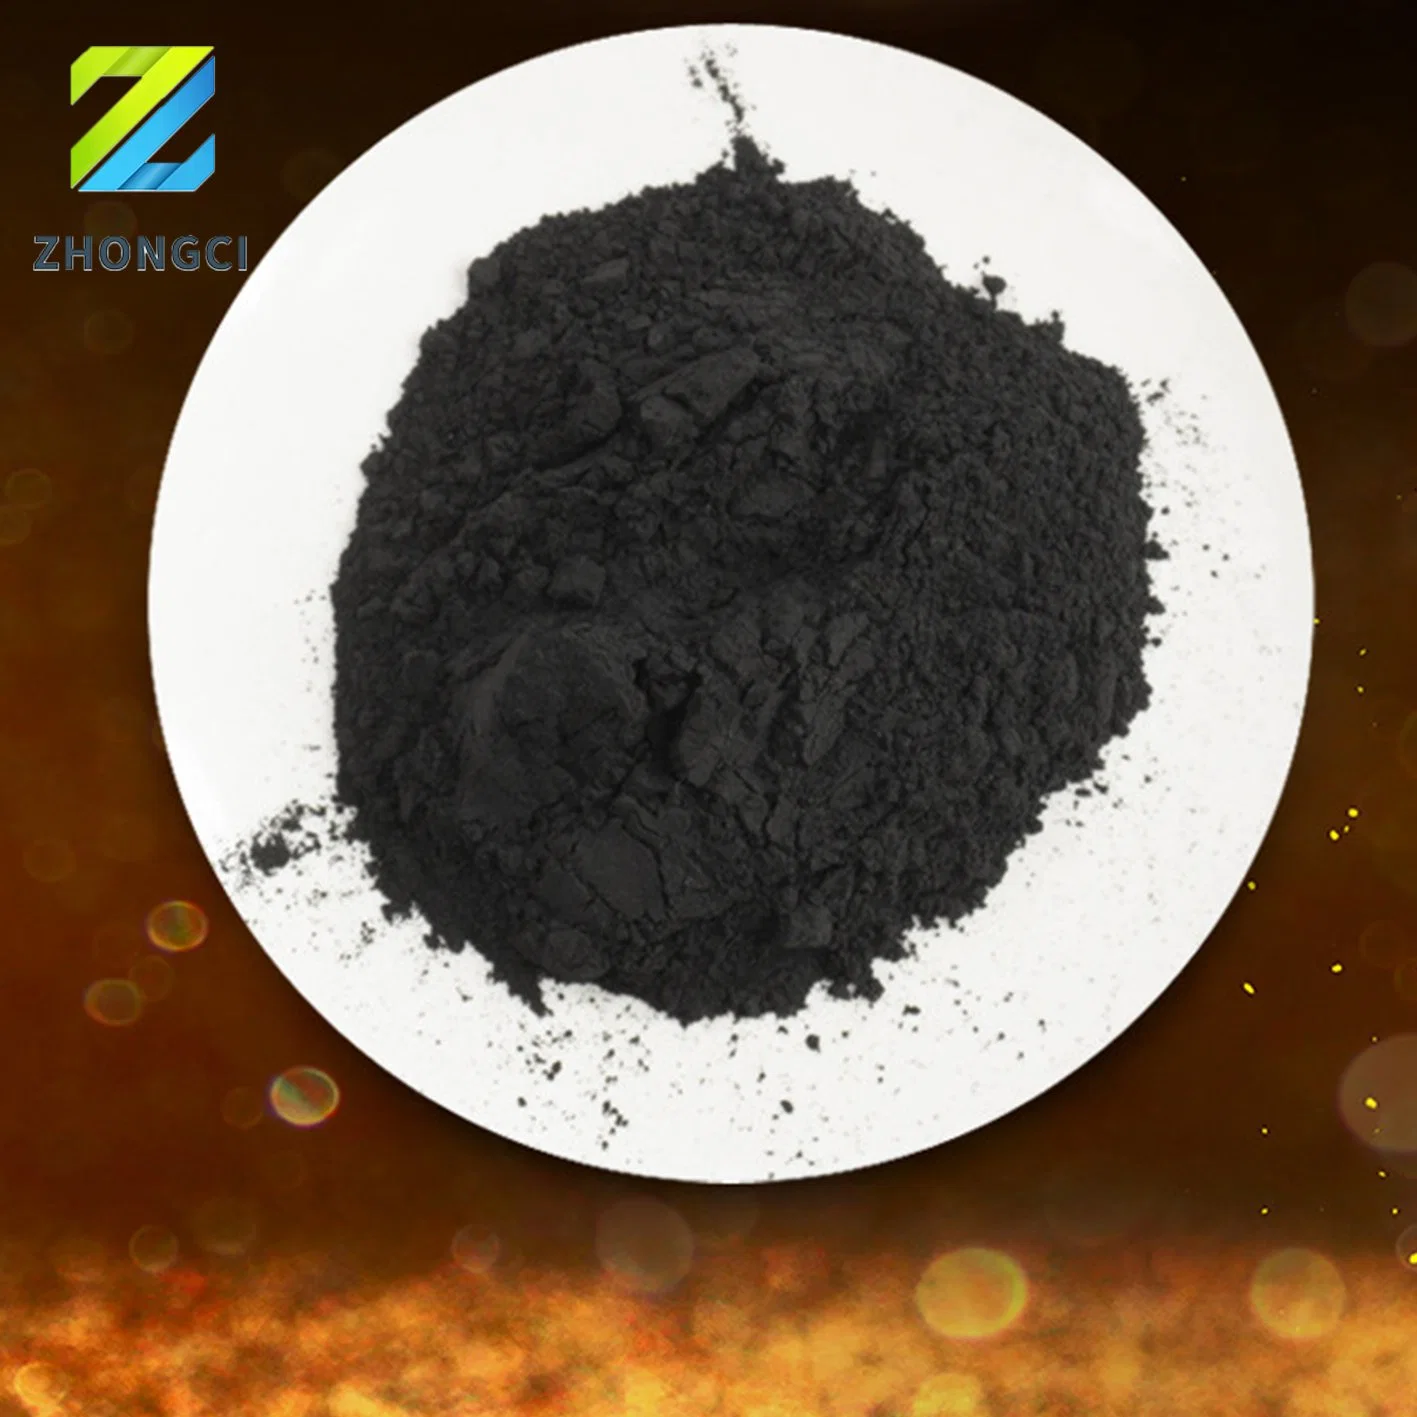 Zhongci Wood Powdered Carbon for Edible Oil Decolor Deodorizer Activated Charcoal Carbon Powder